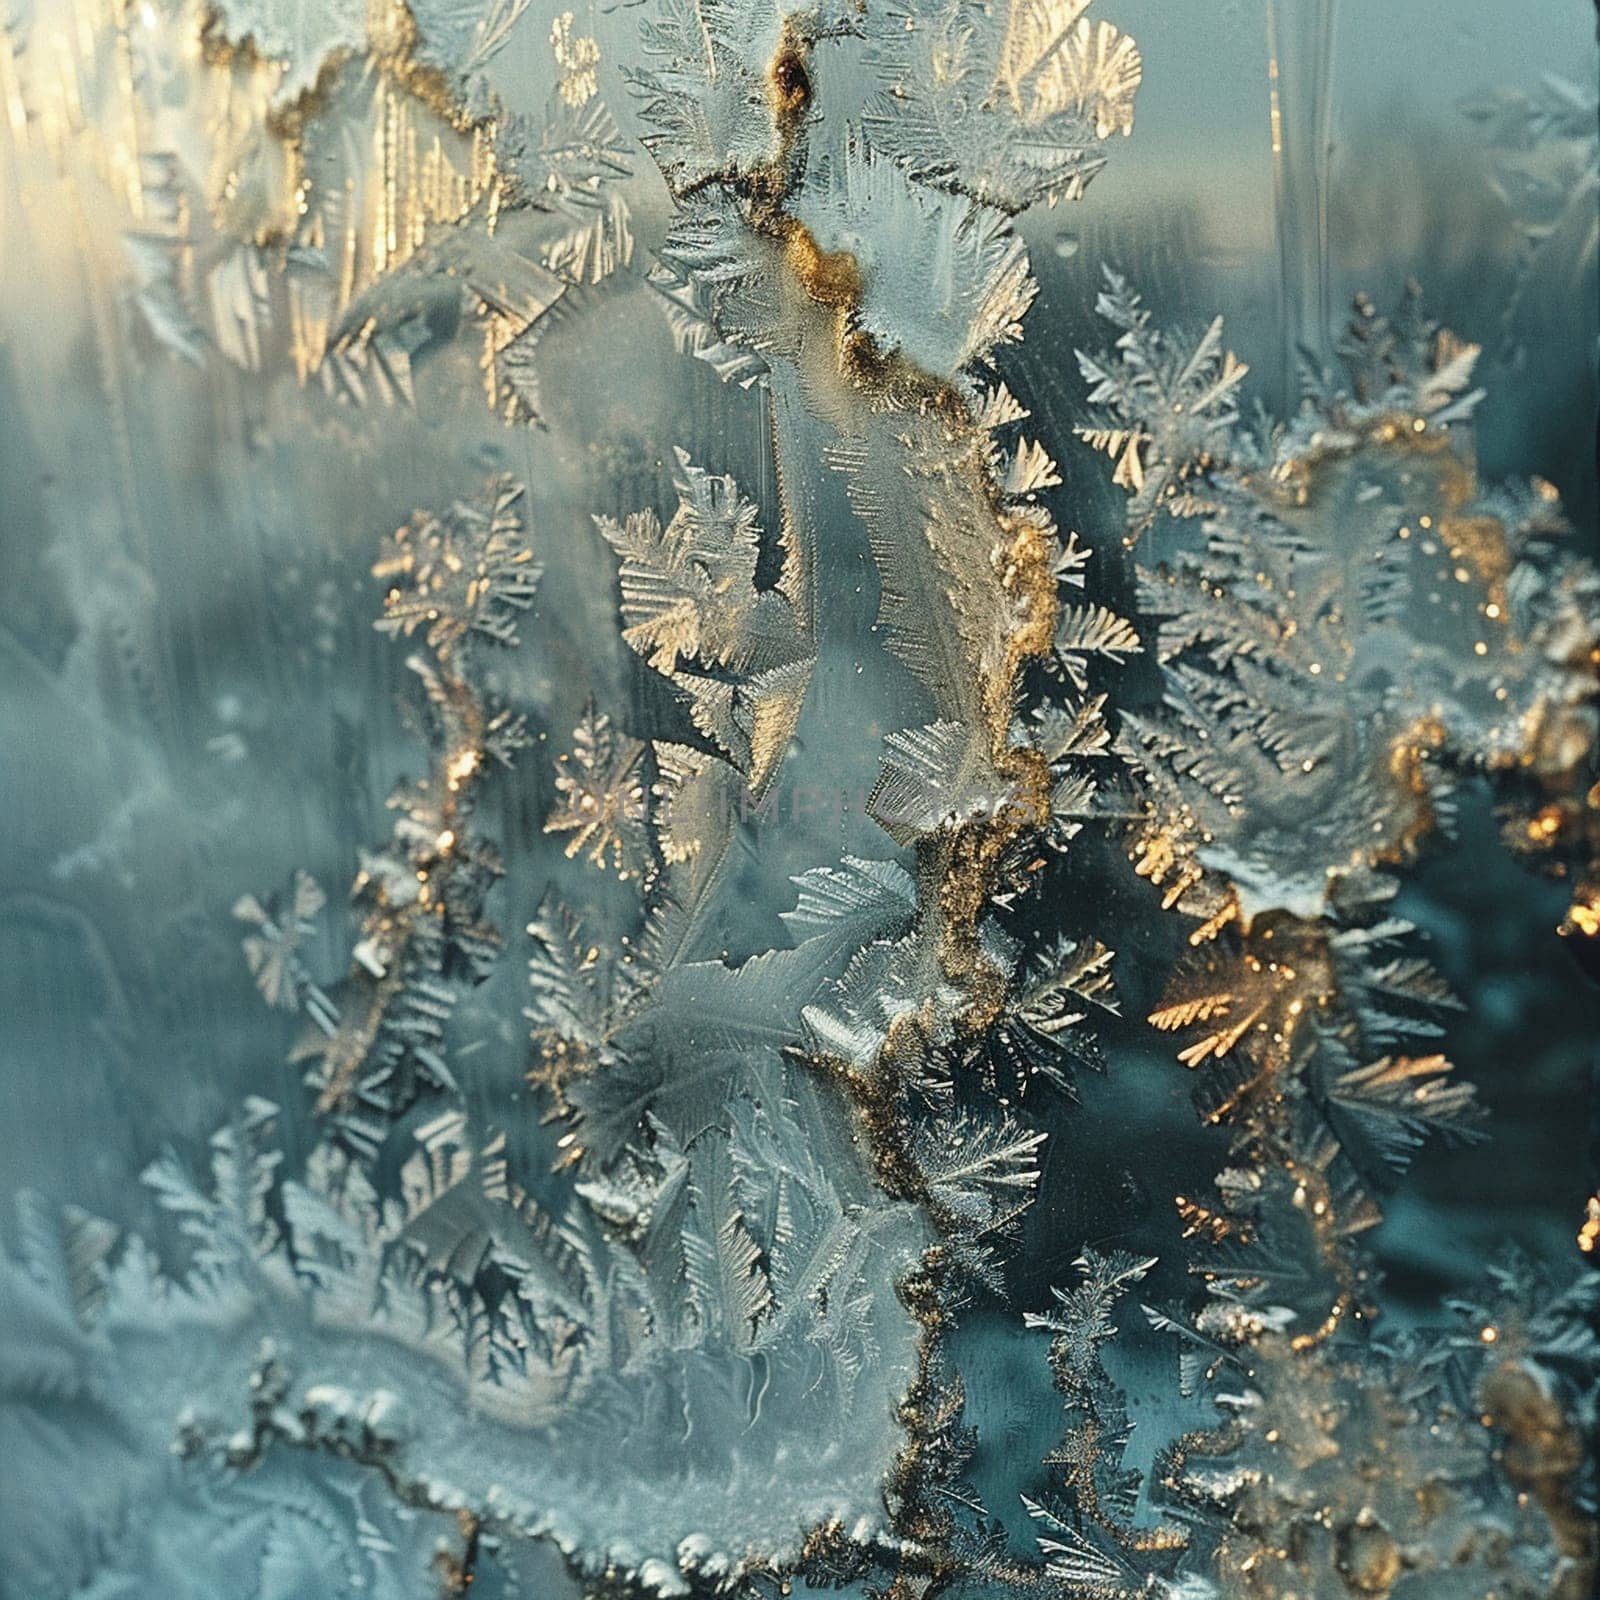 Close-up of intricate ice patterns on a window, illustrating winter's artistry.